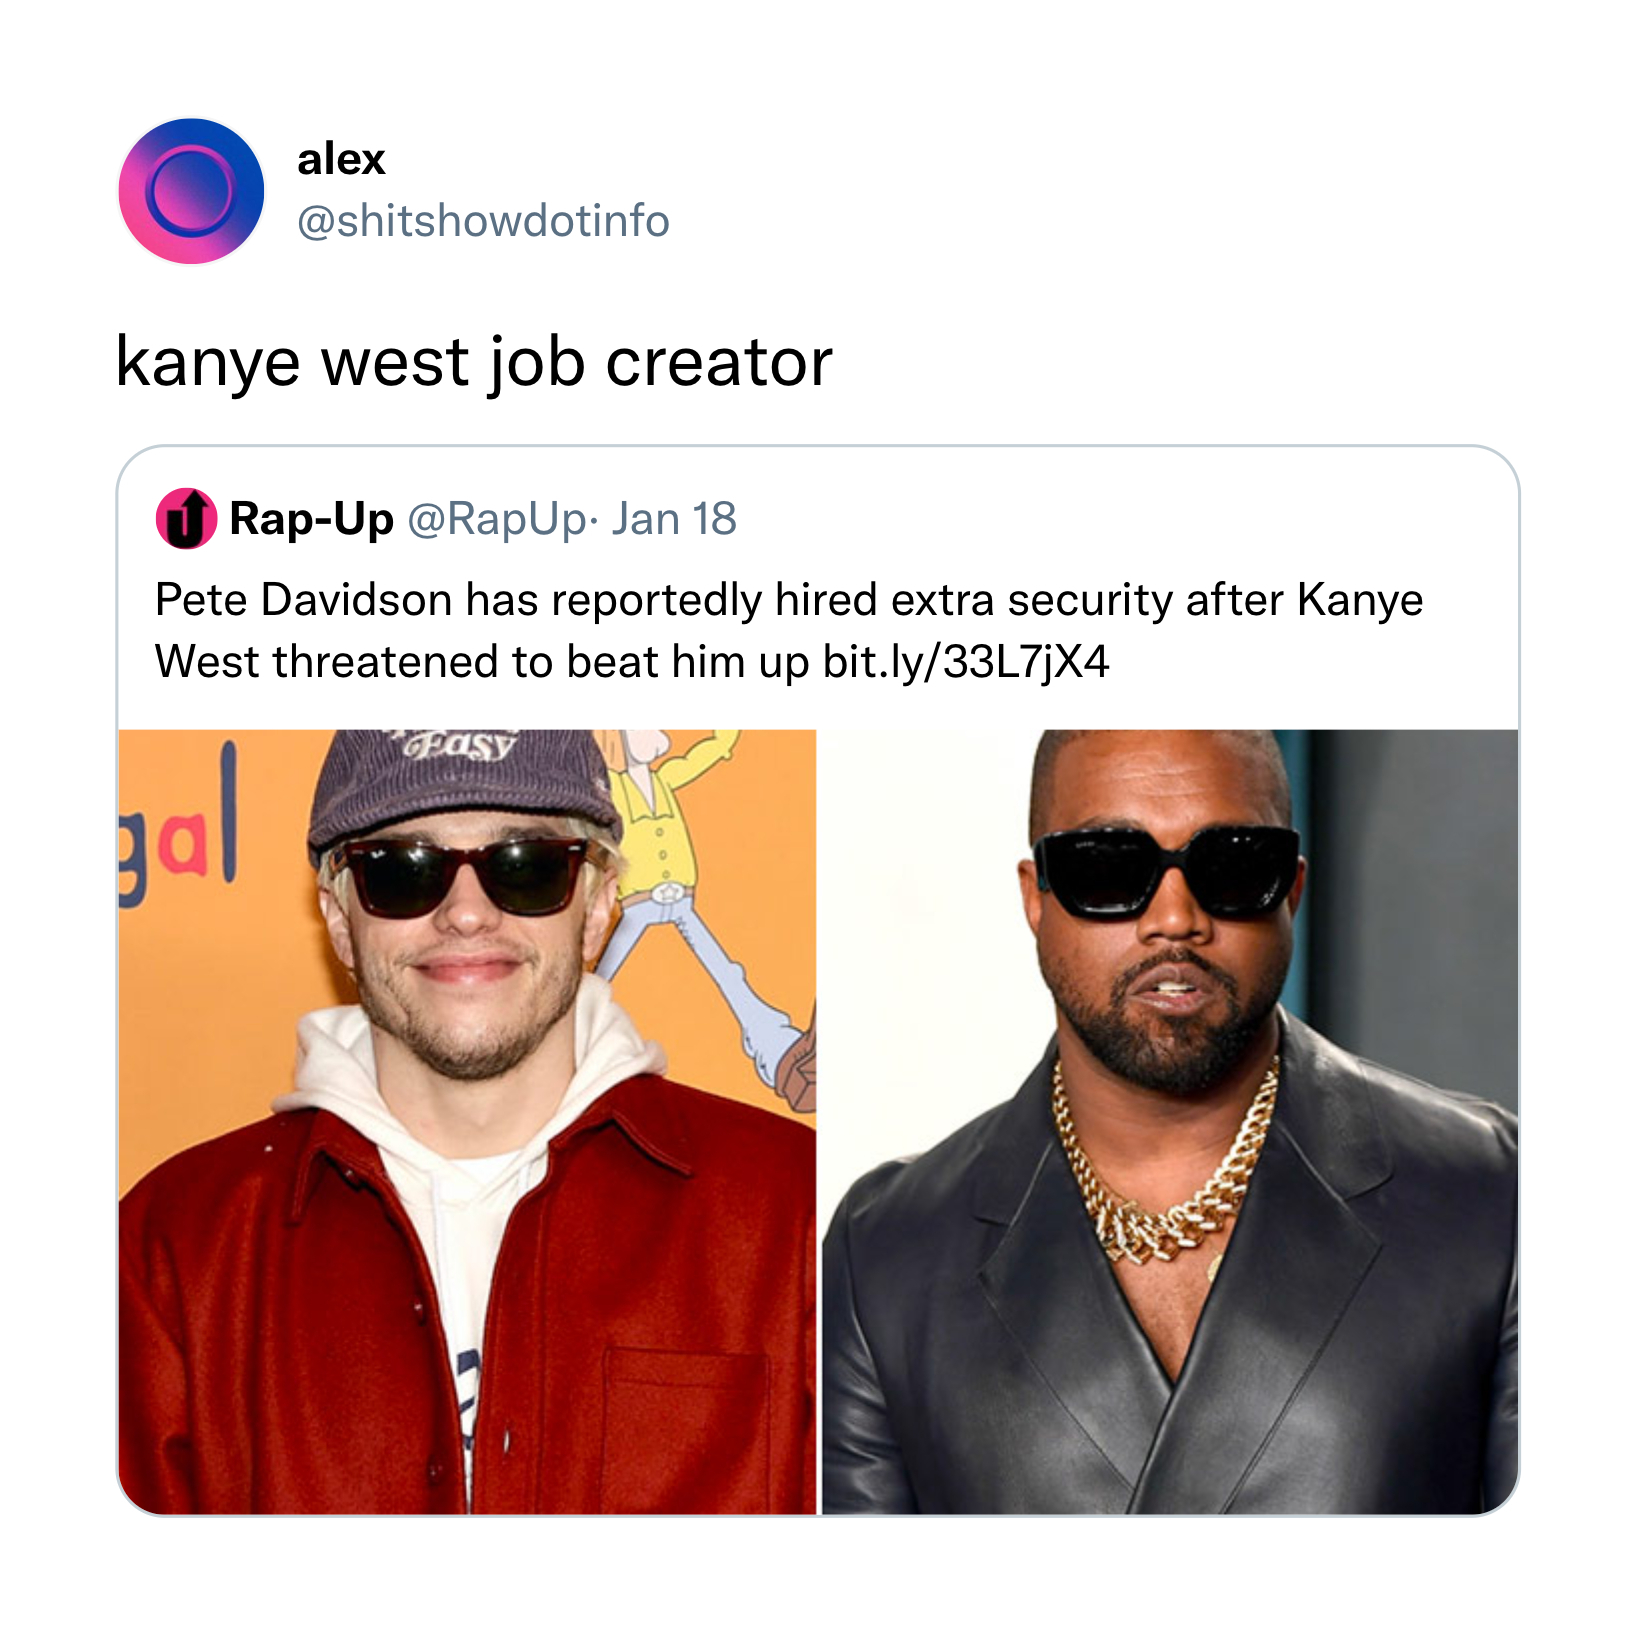 kanye and jake paul - alex kanye west job creator RapUp . Jan 18 Pete Davidson has reportedly hired extra security after Kanye West threatened to beat him up bit.ly33L7JX4 pal